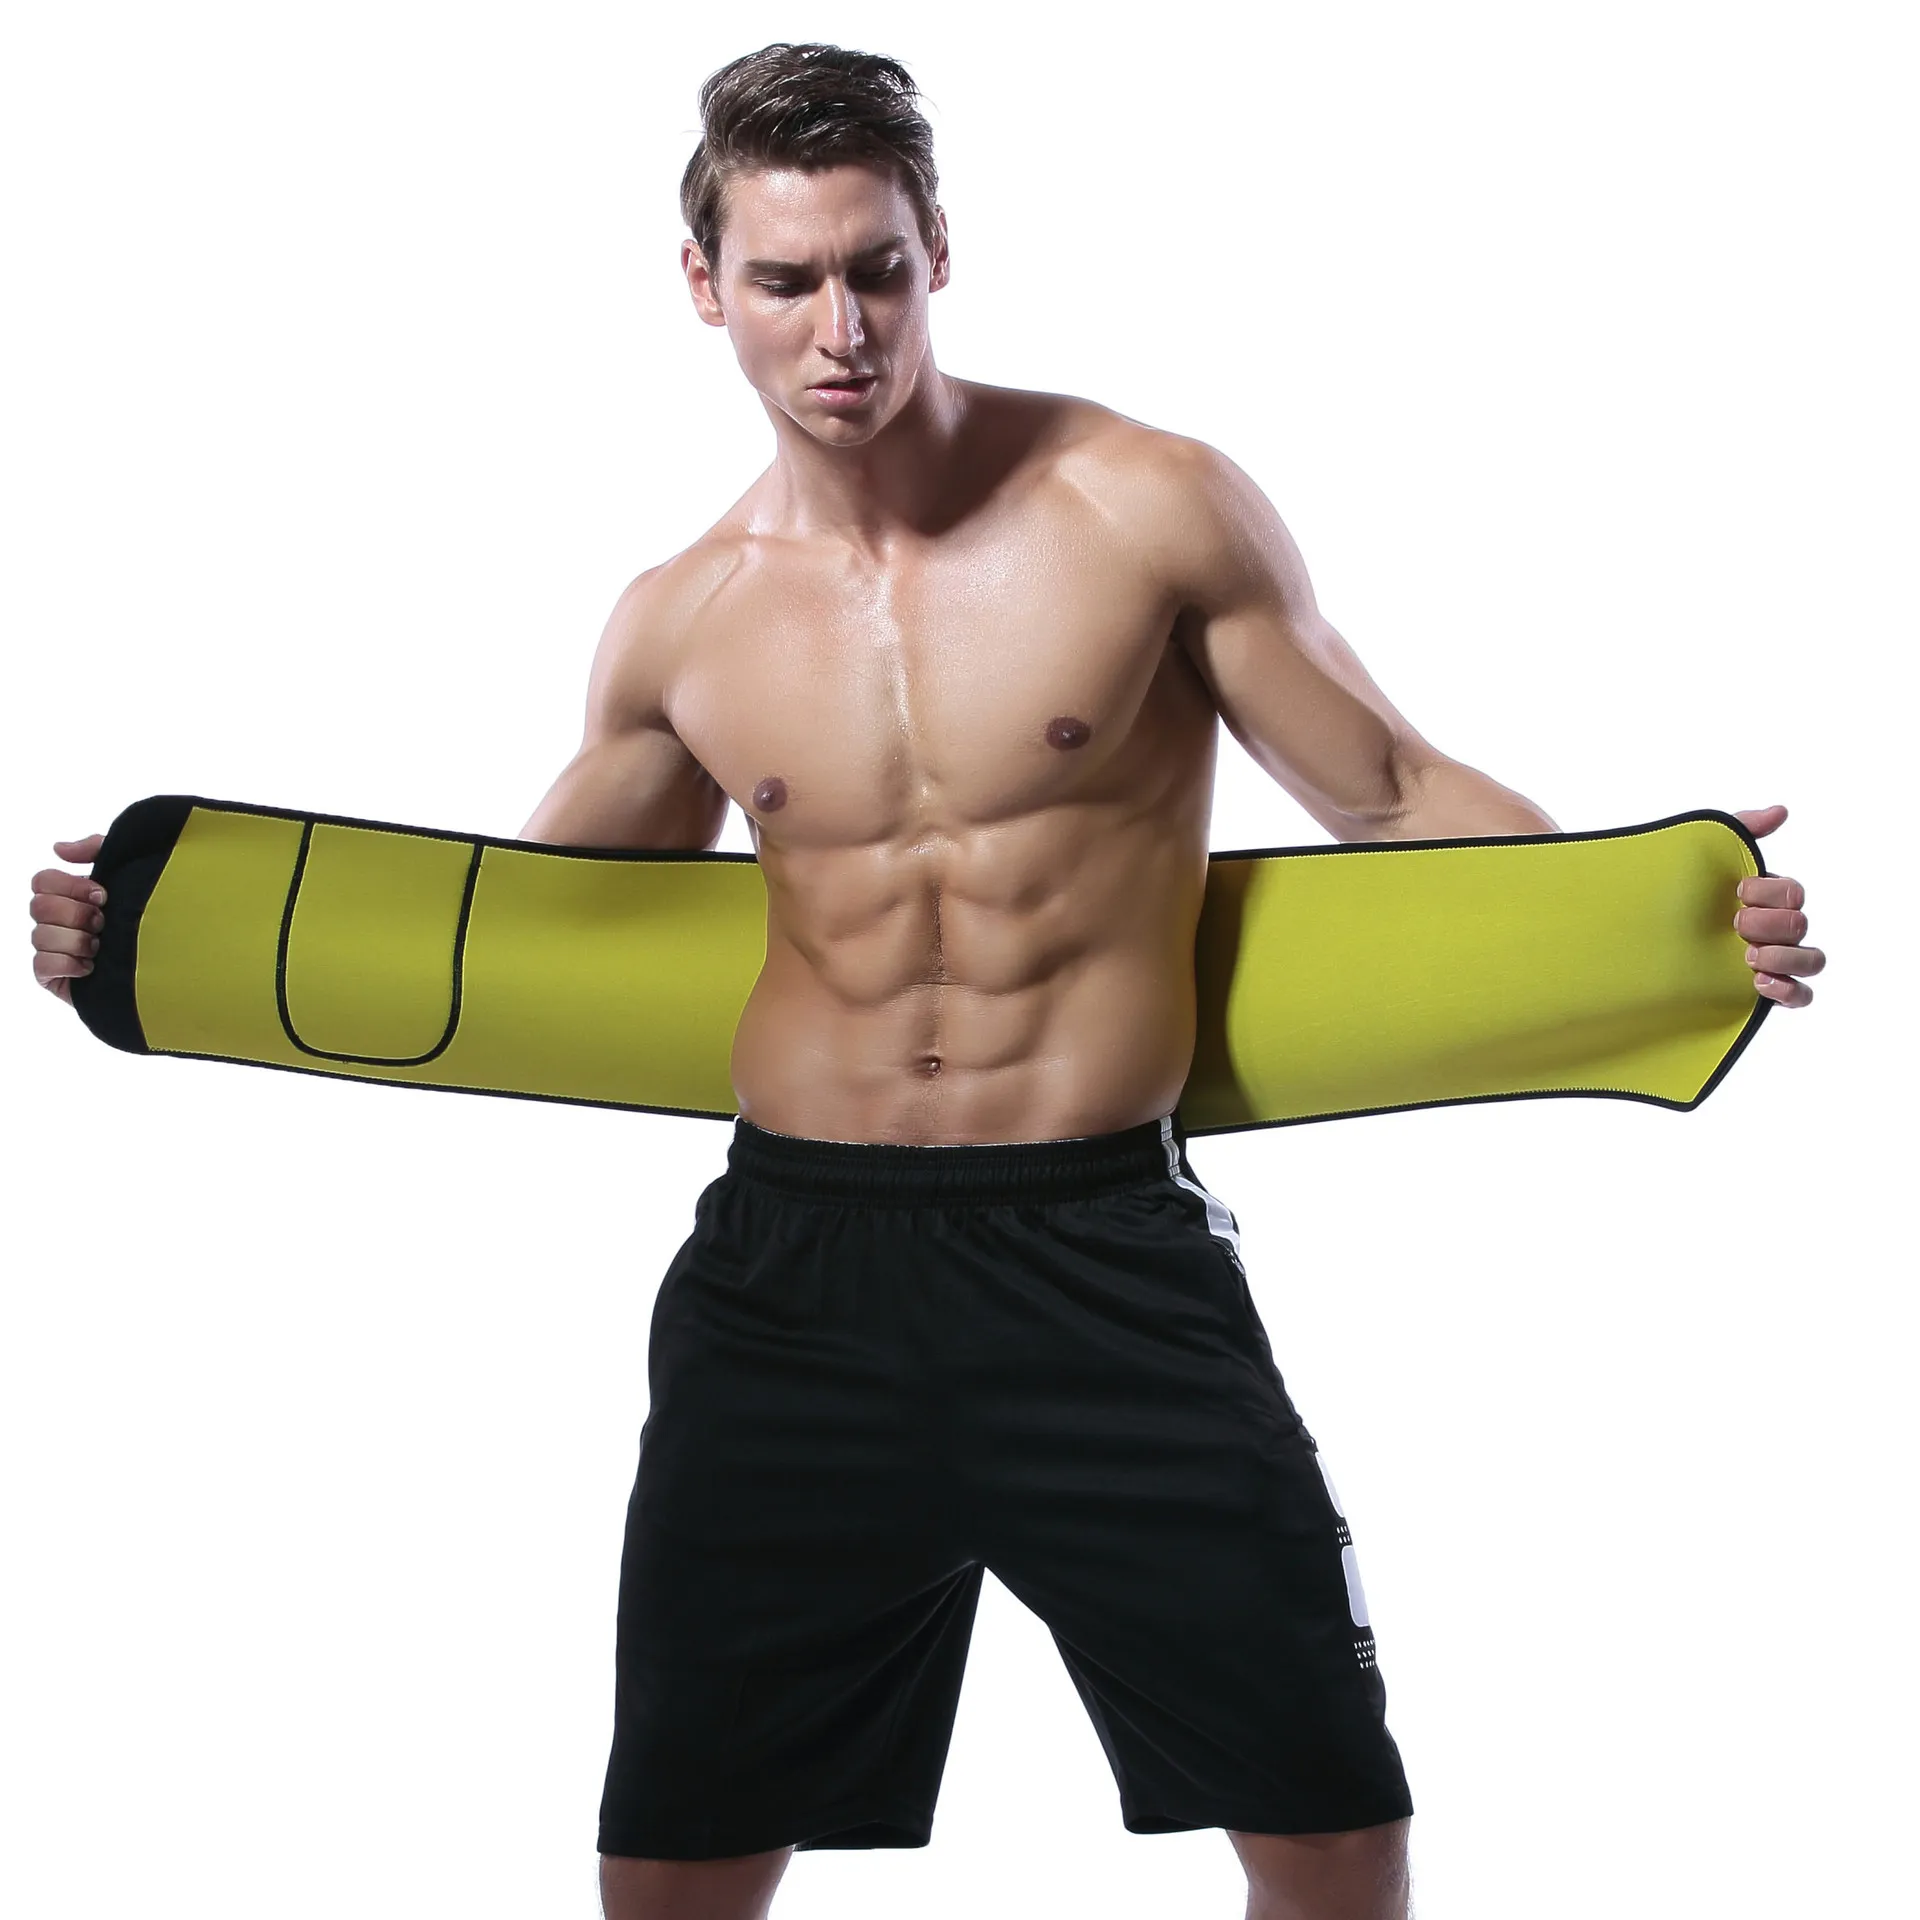 Body Buidling Waist Training Sweat Belt Belt For Women & Men Professional  Sauna Sweat Bands For Slimming, Fitness, And Workout DHL Shipping Included  From Buymall, $10.78